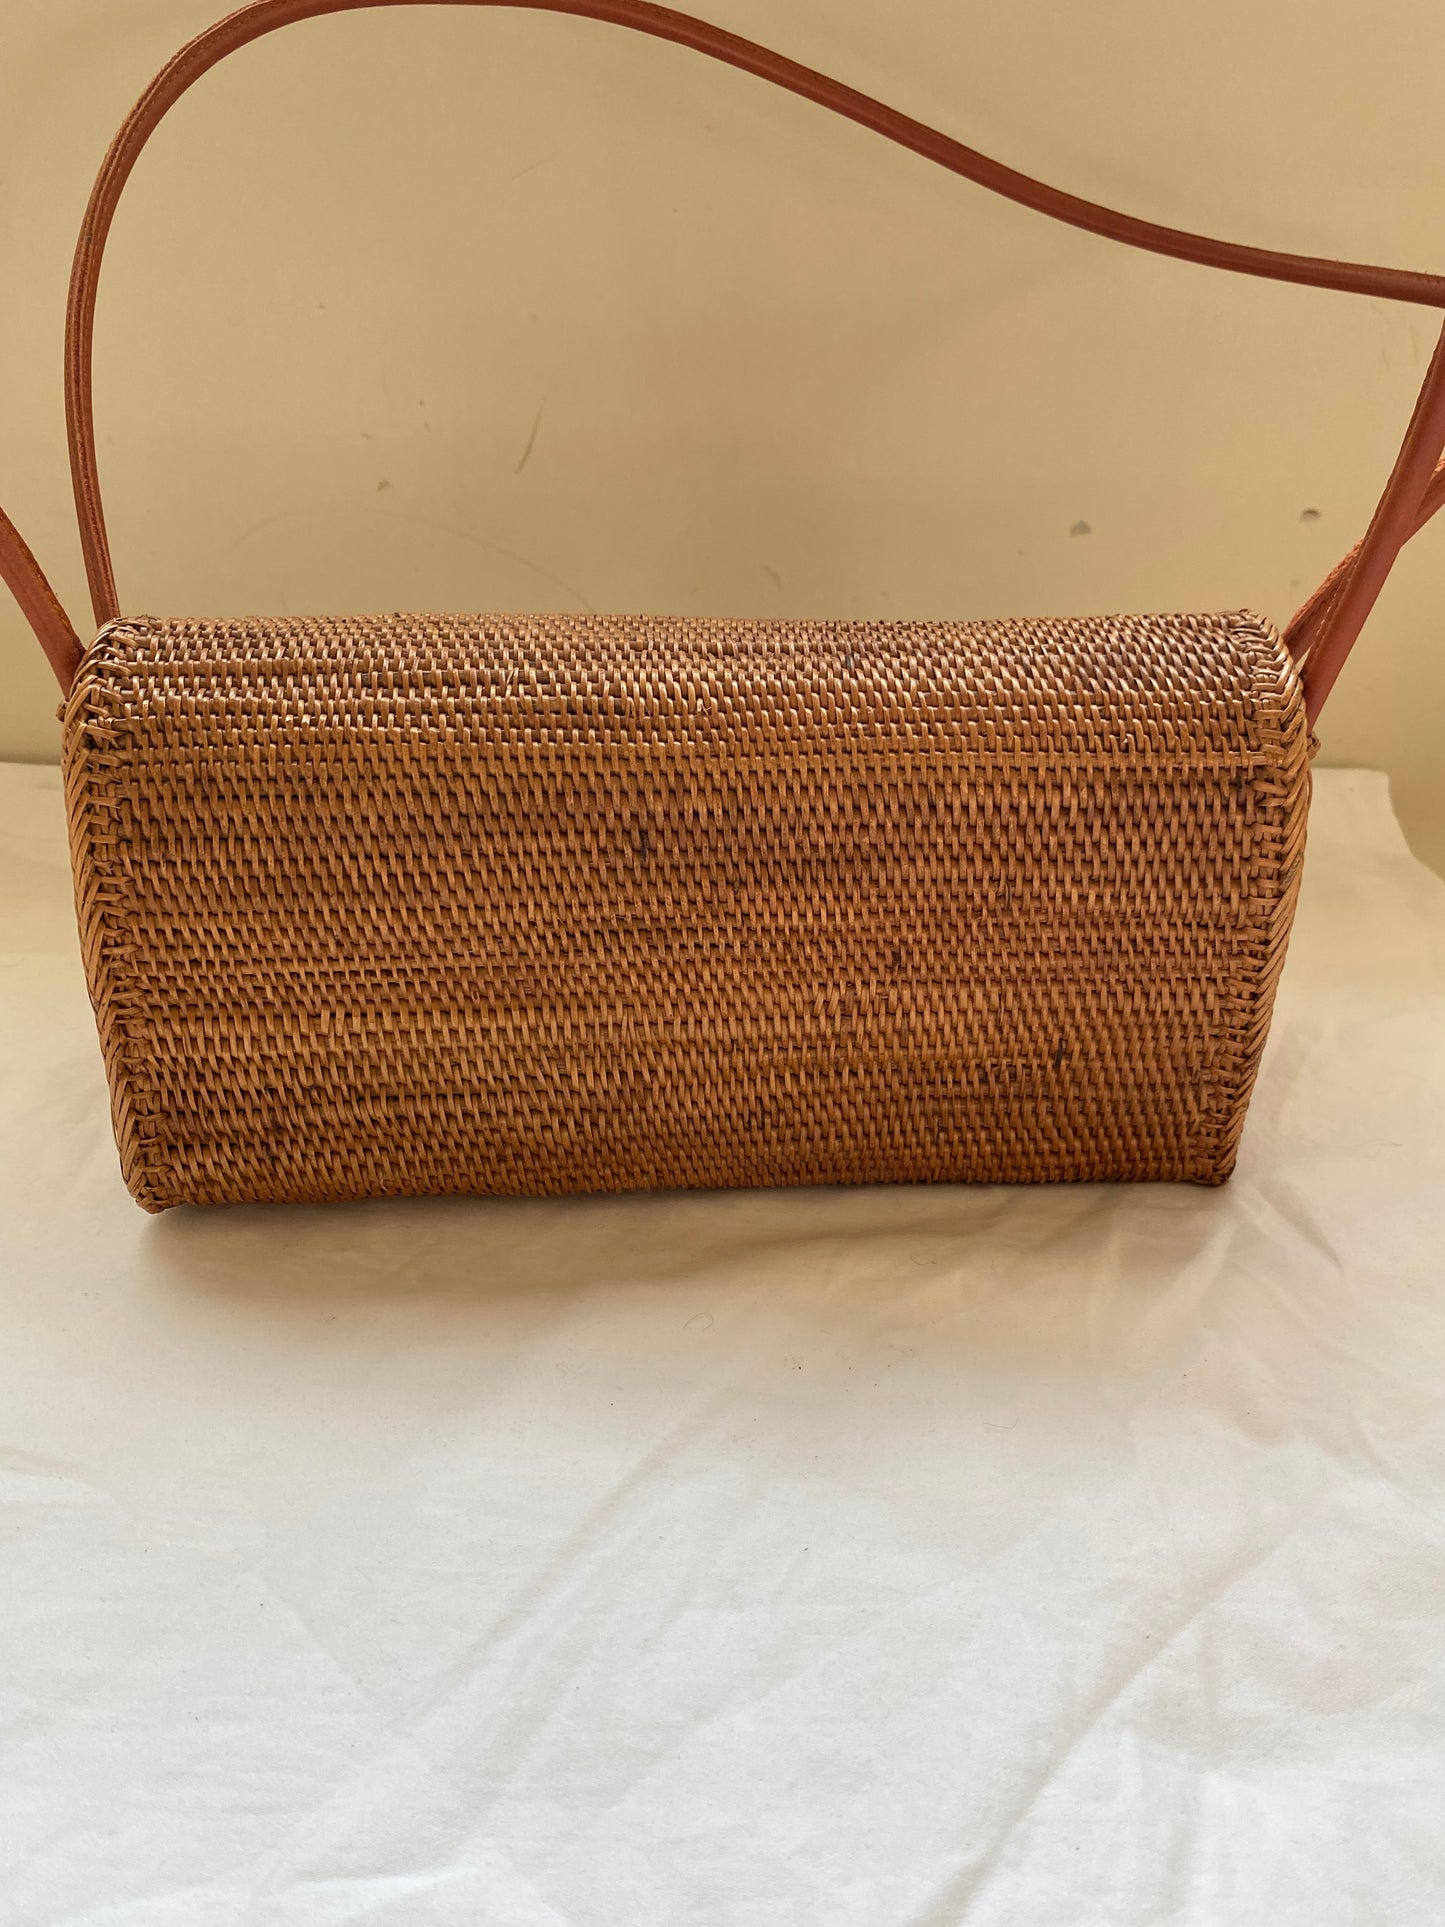 ﻿Woven Basket Bag with Leather Straps